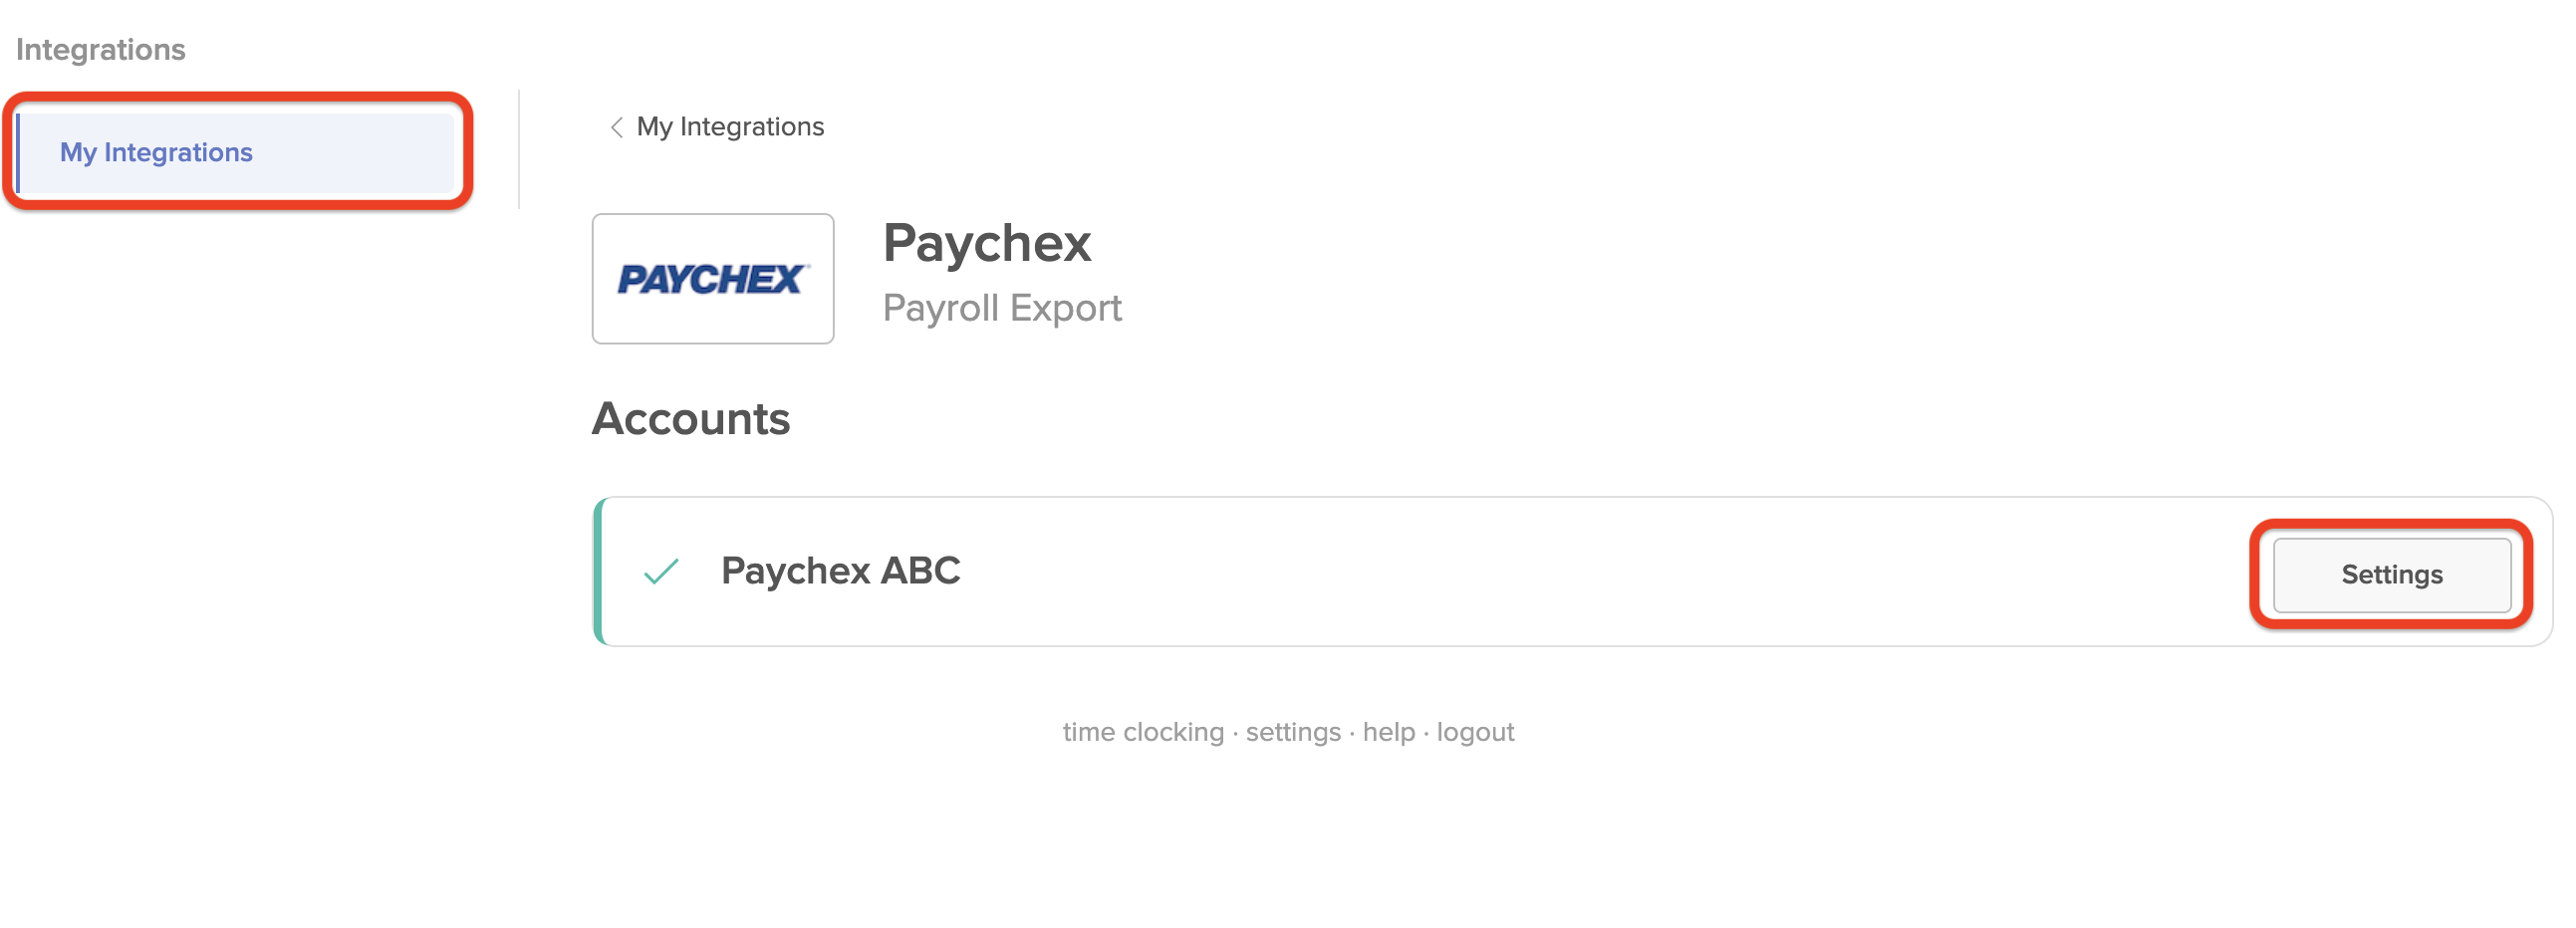 Paychex Payroll Export 7shifts